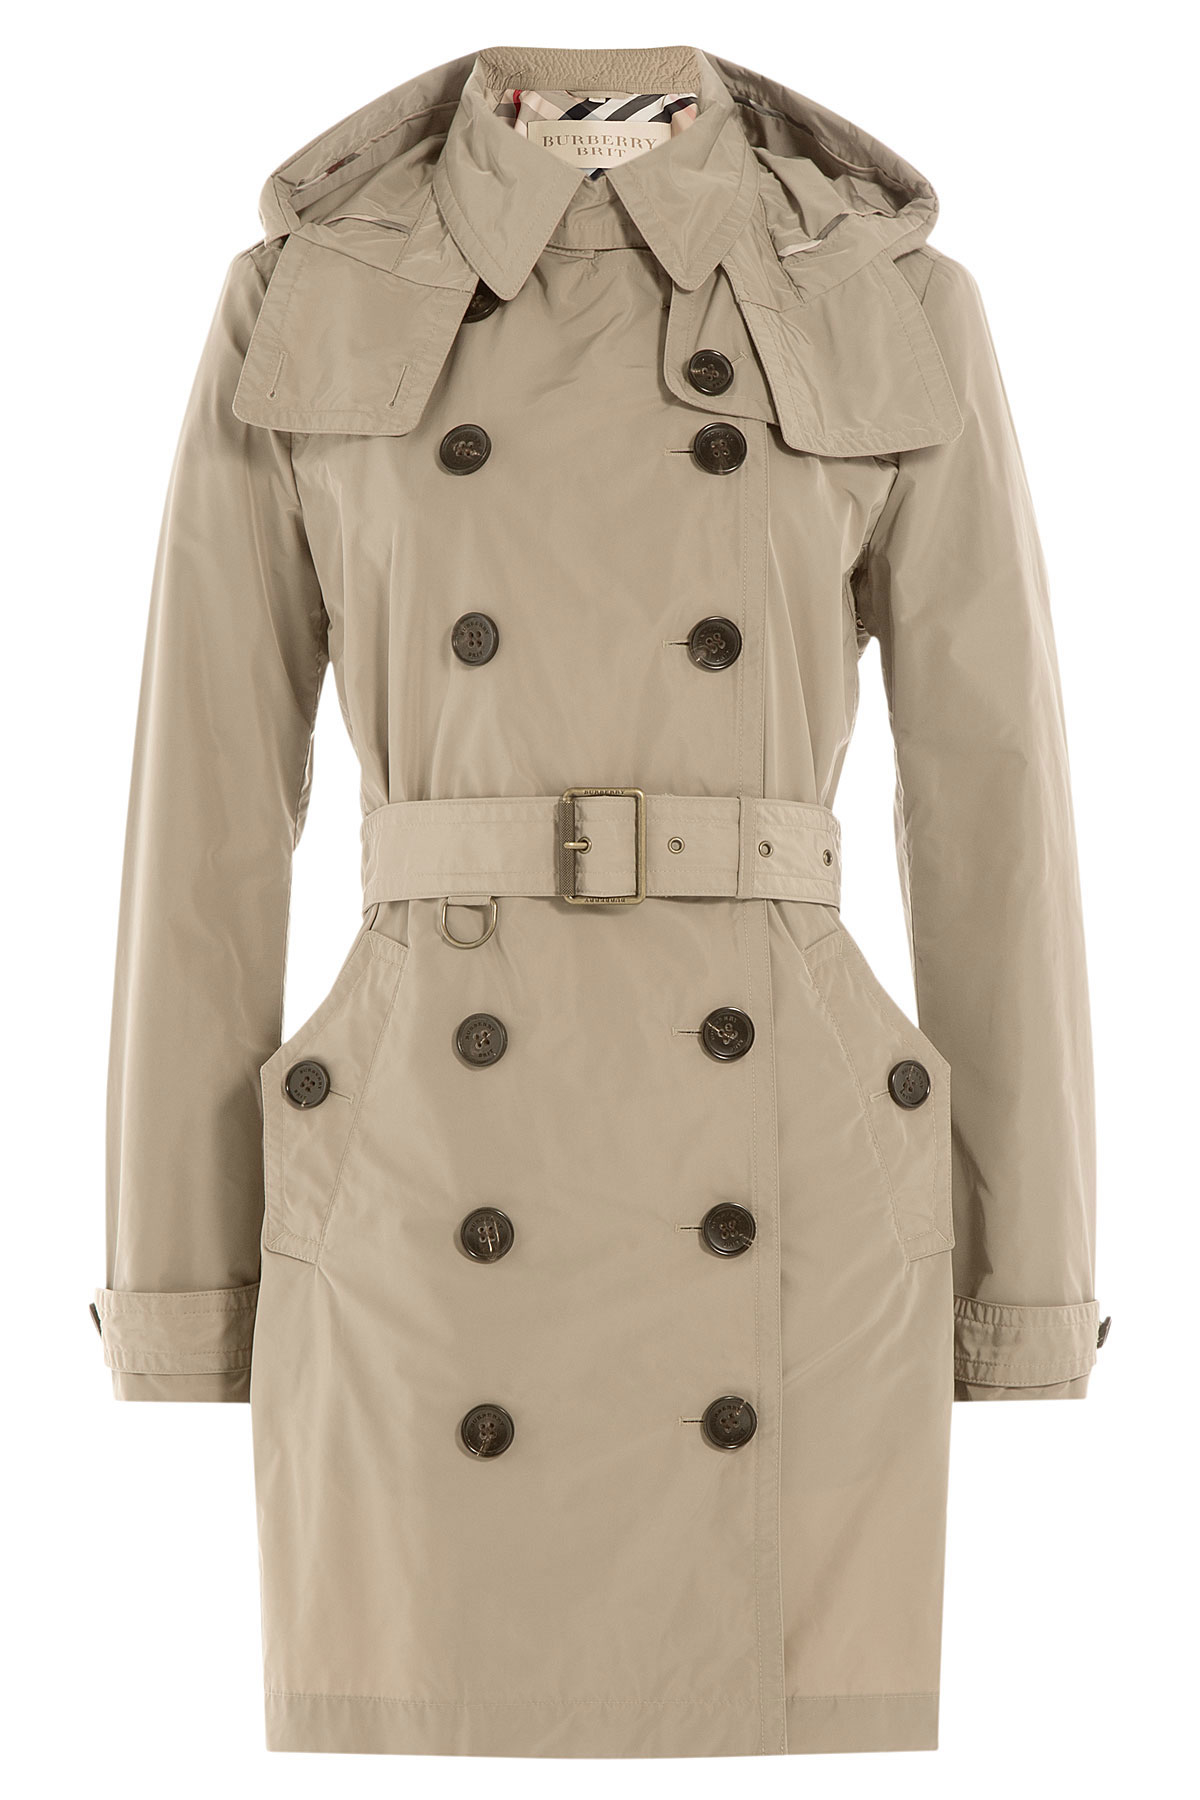 Burberry brit Waterproof Trench Coat With Hood - Beige in Natural | Lyst